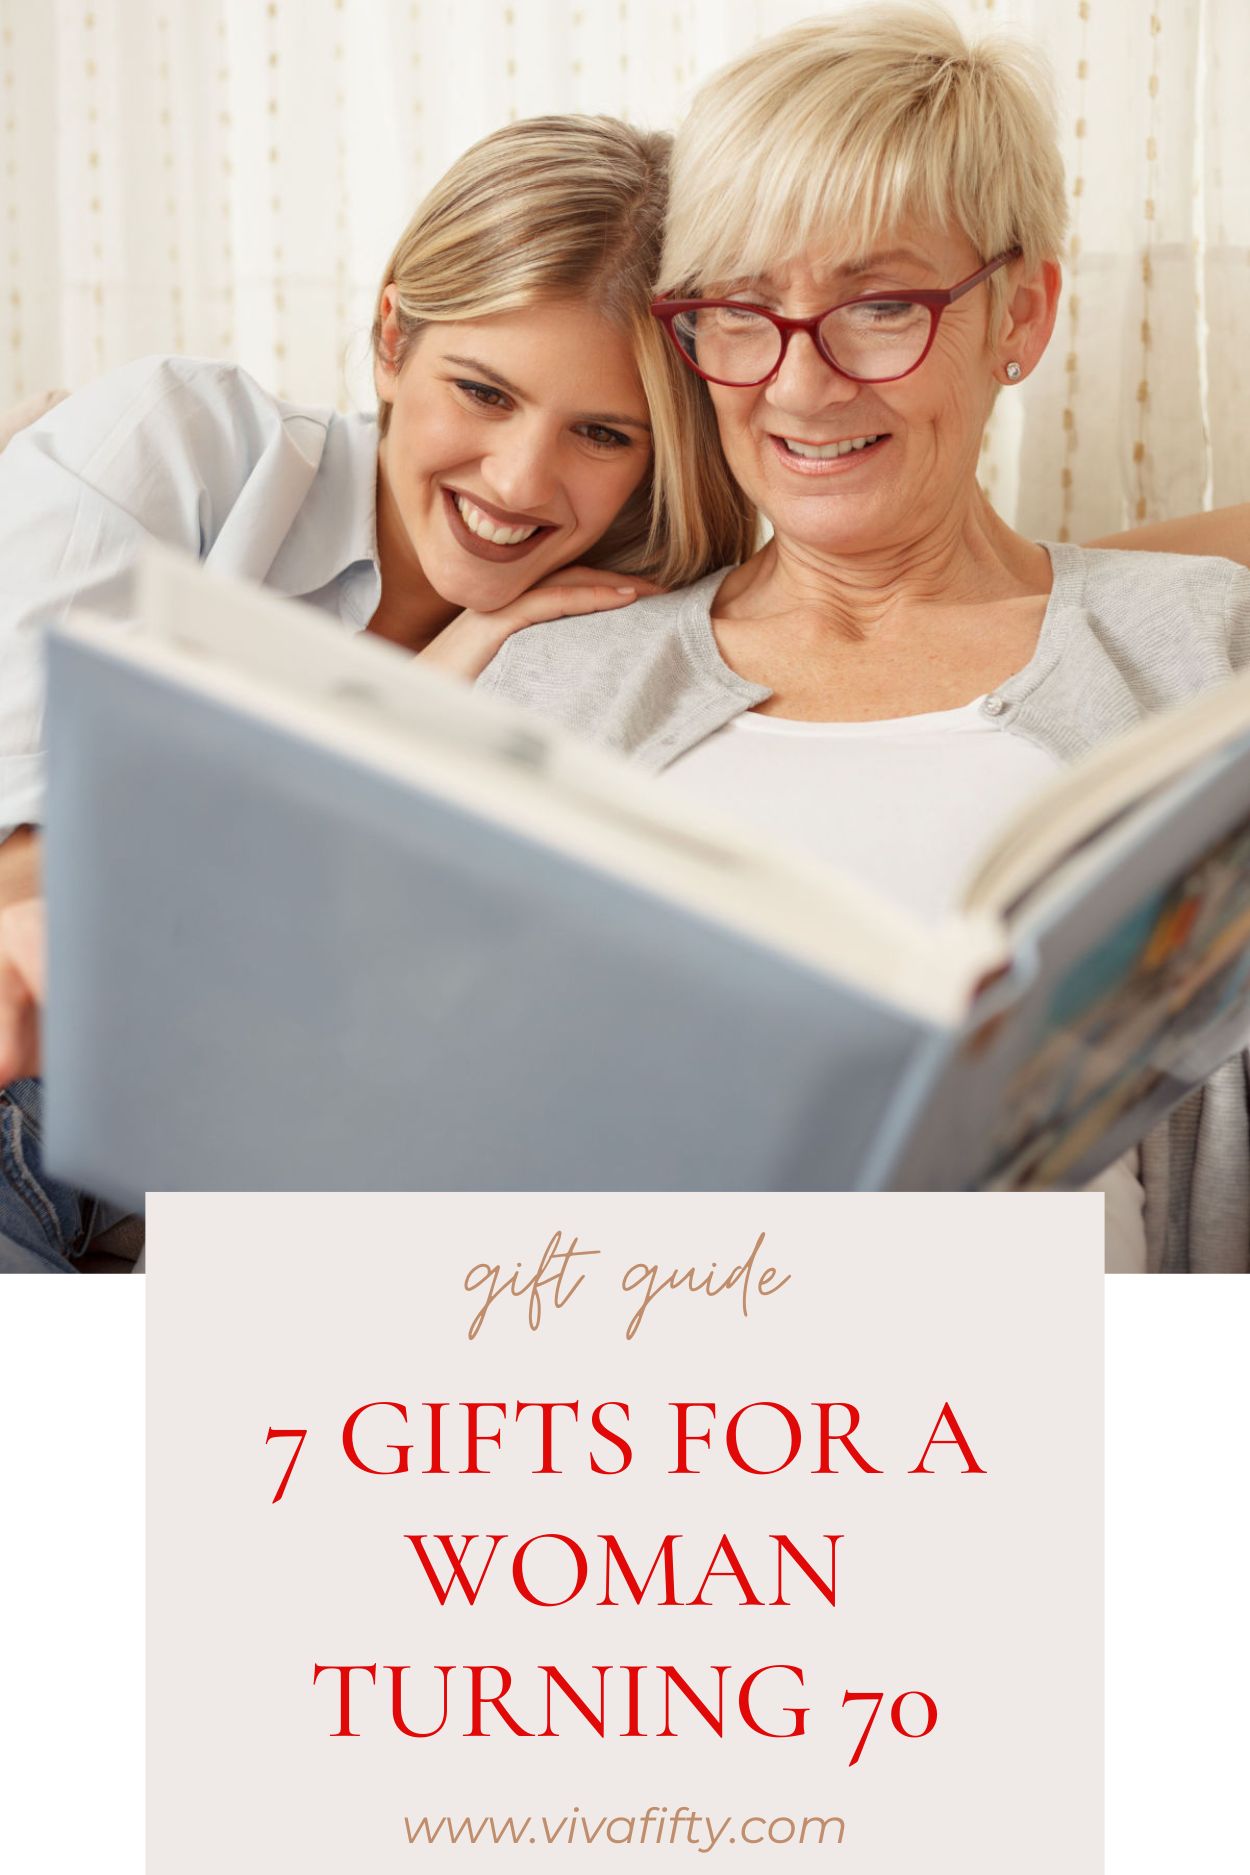 A gift for a 70th birthday should above all be thoughtful and meaningful to the recipient, whether it is an experience or a material gift. 